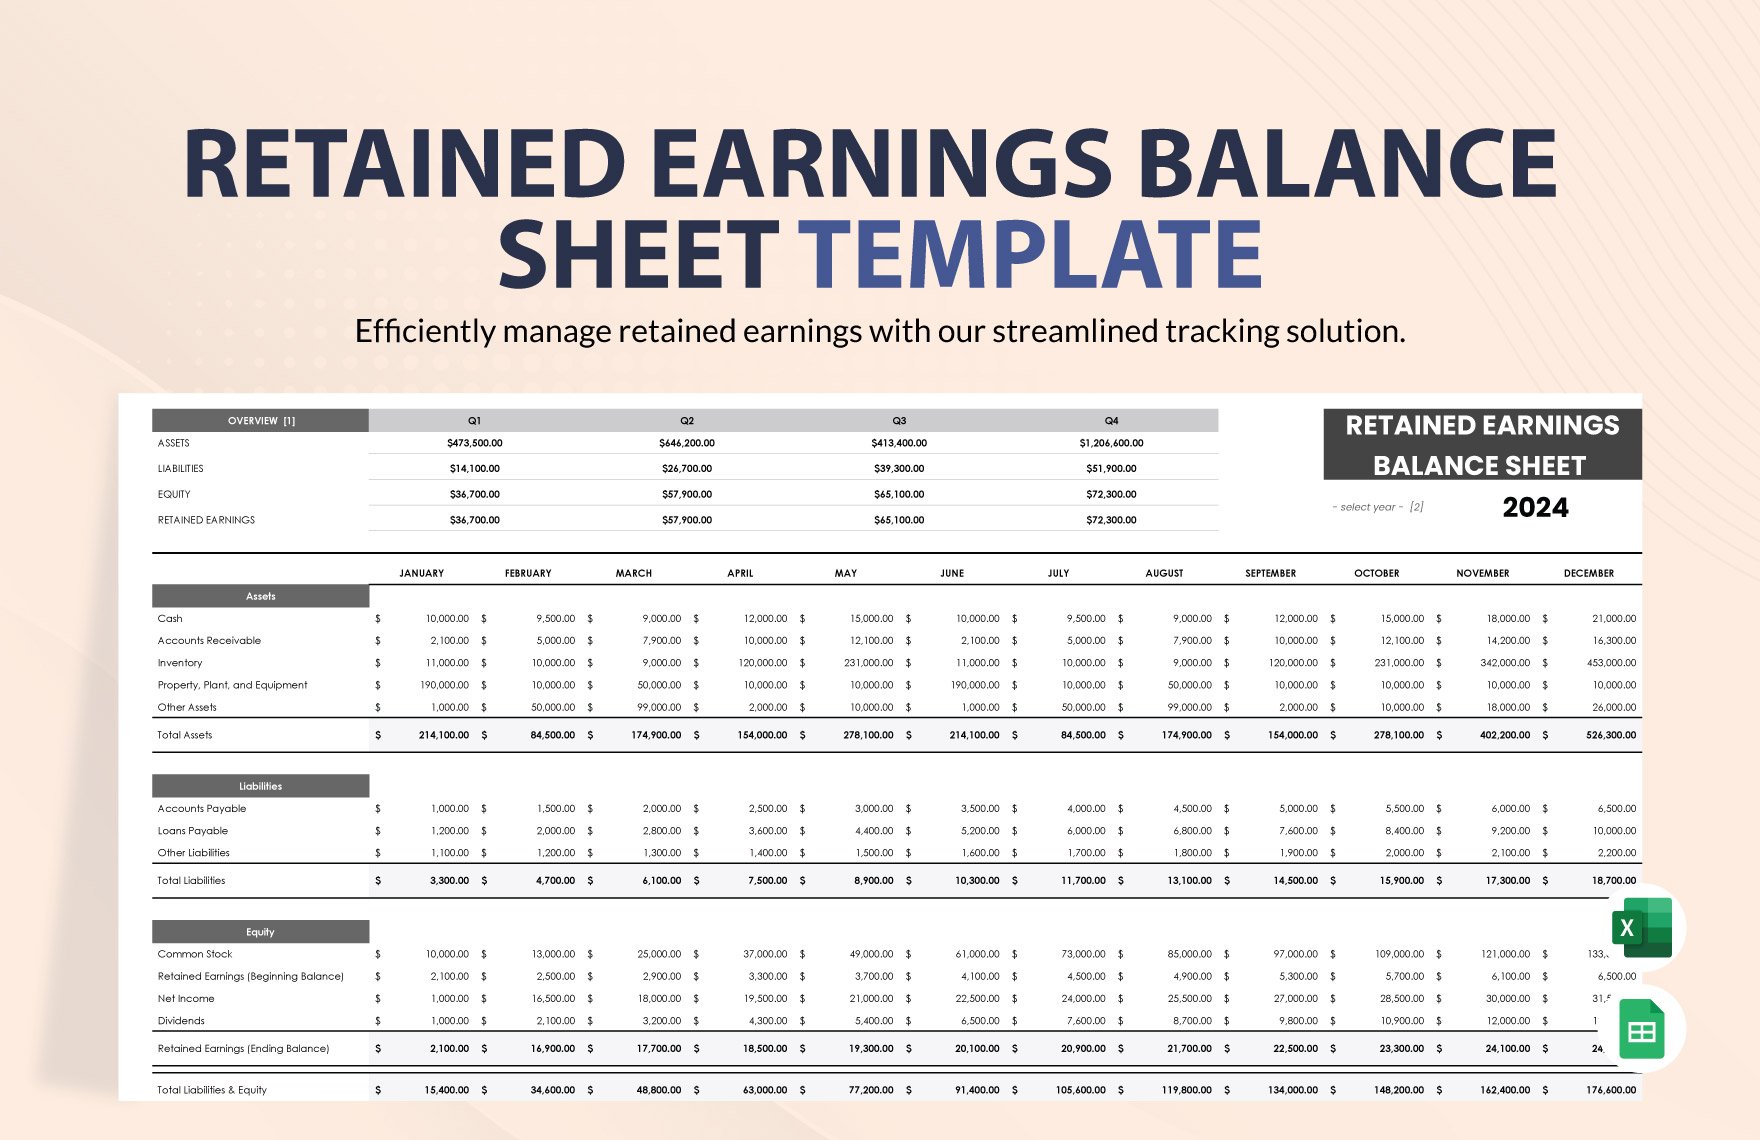 Retained Earnings Balance Sheet Template in Excel, Google Sheets